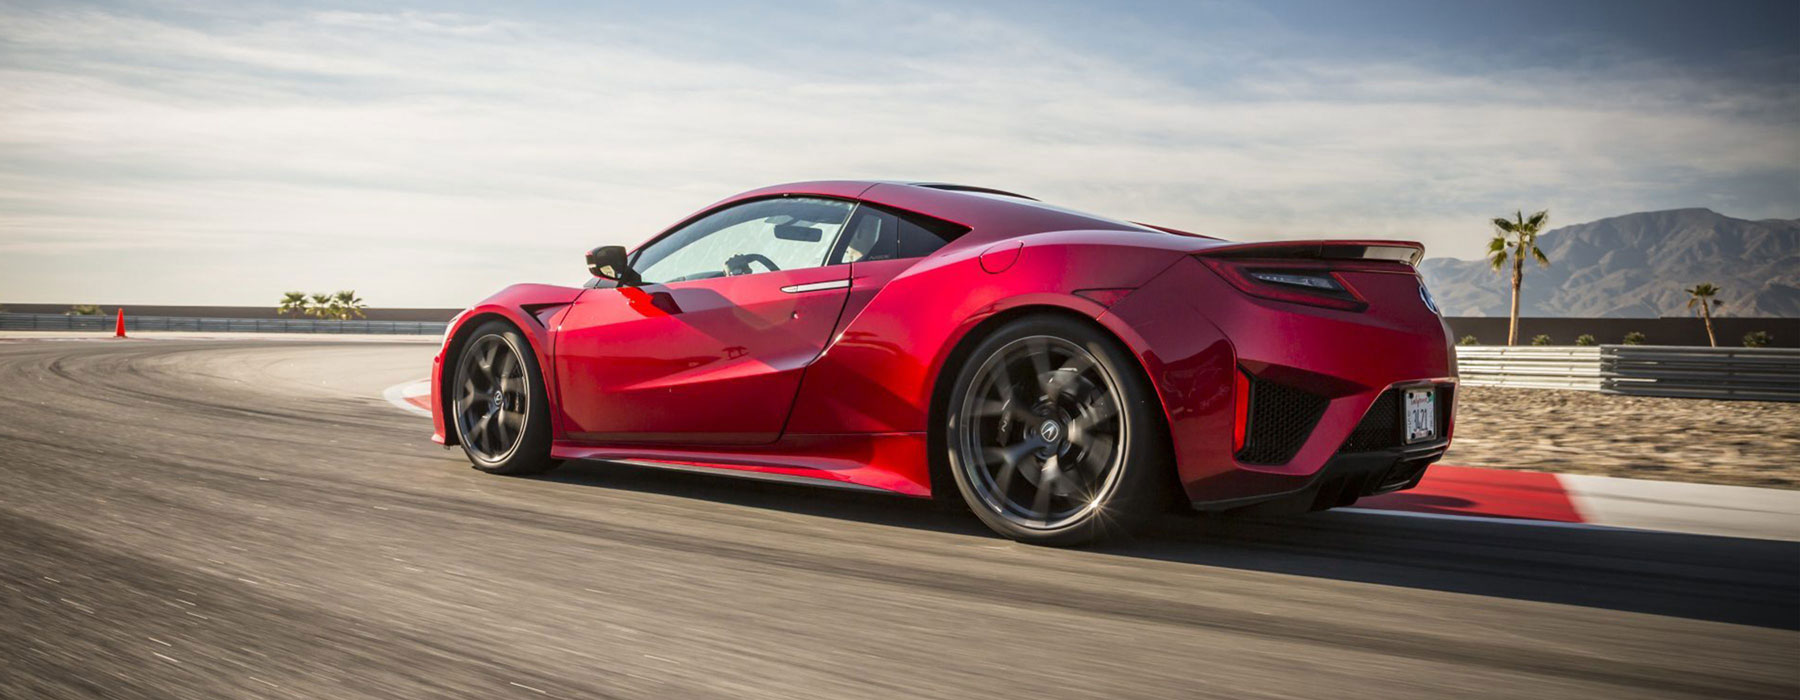 Drive an Acura NSX in Las Vegas or Los Angeles